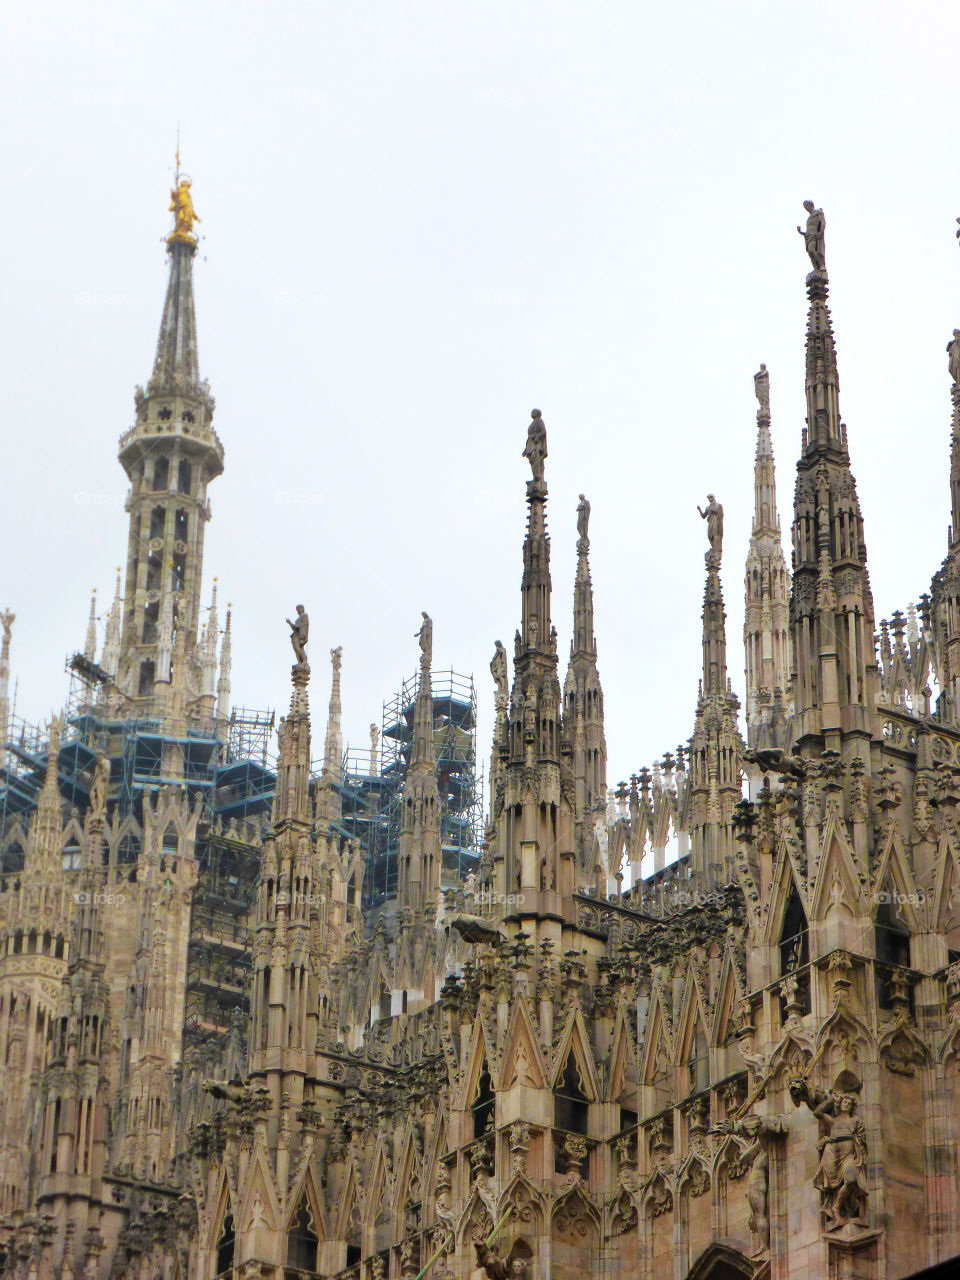 The roof of the Duomo,Milan,Italy